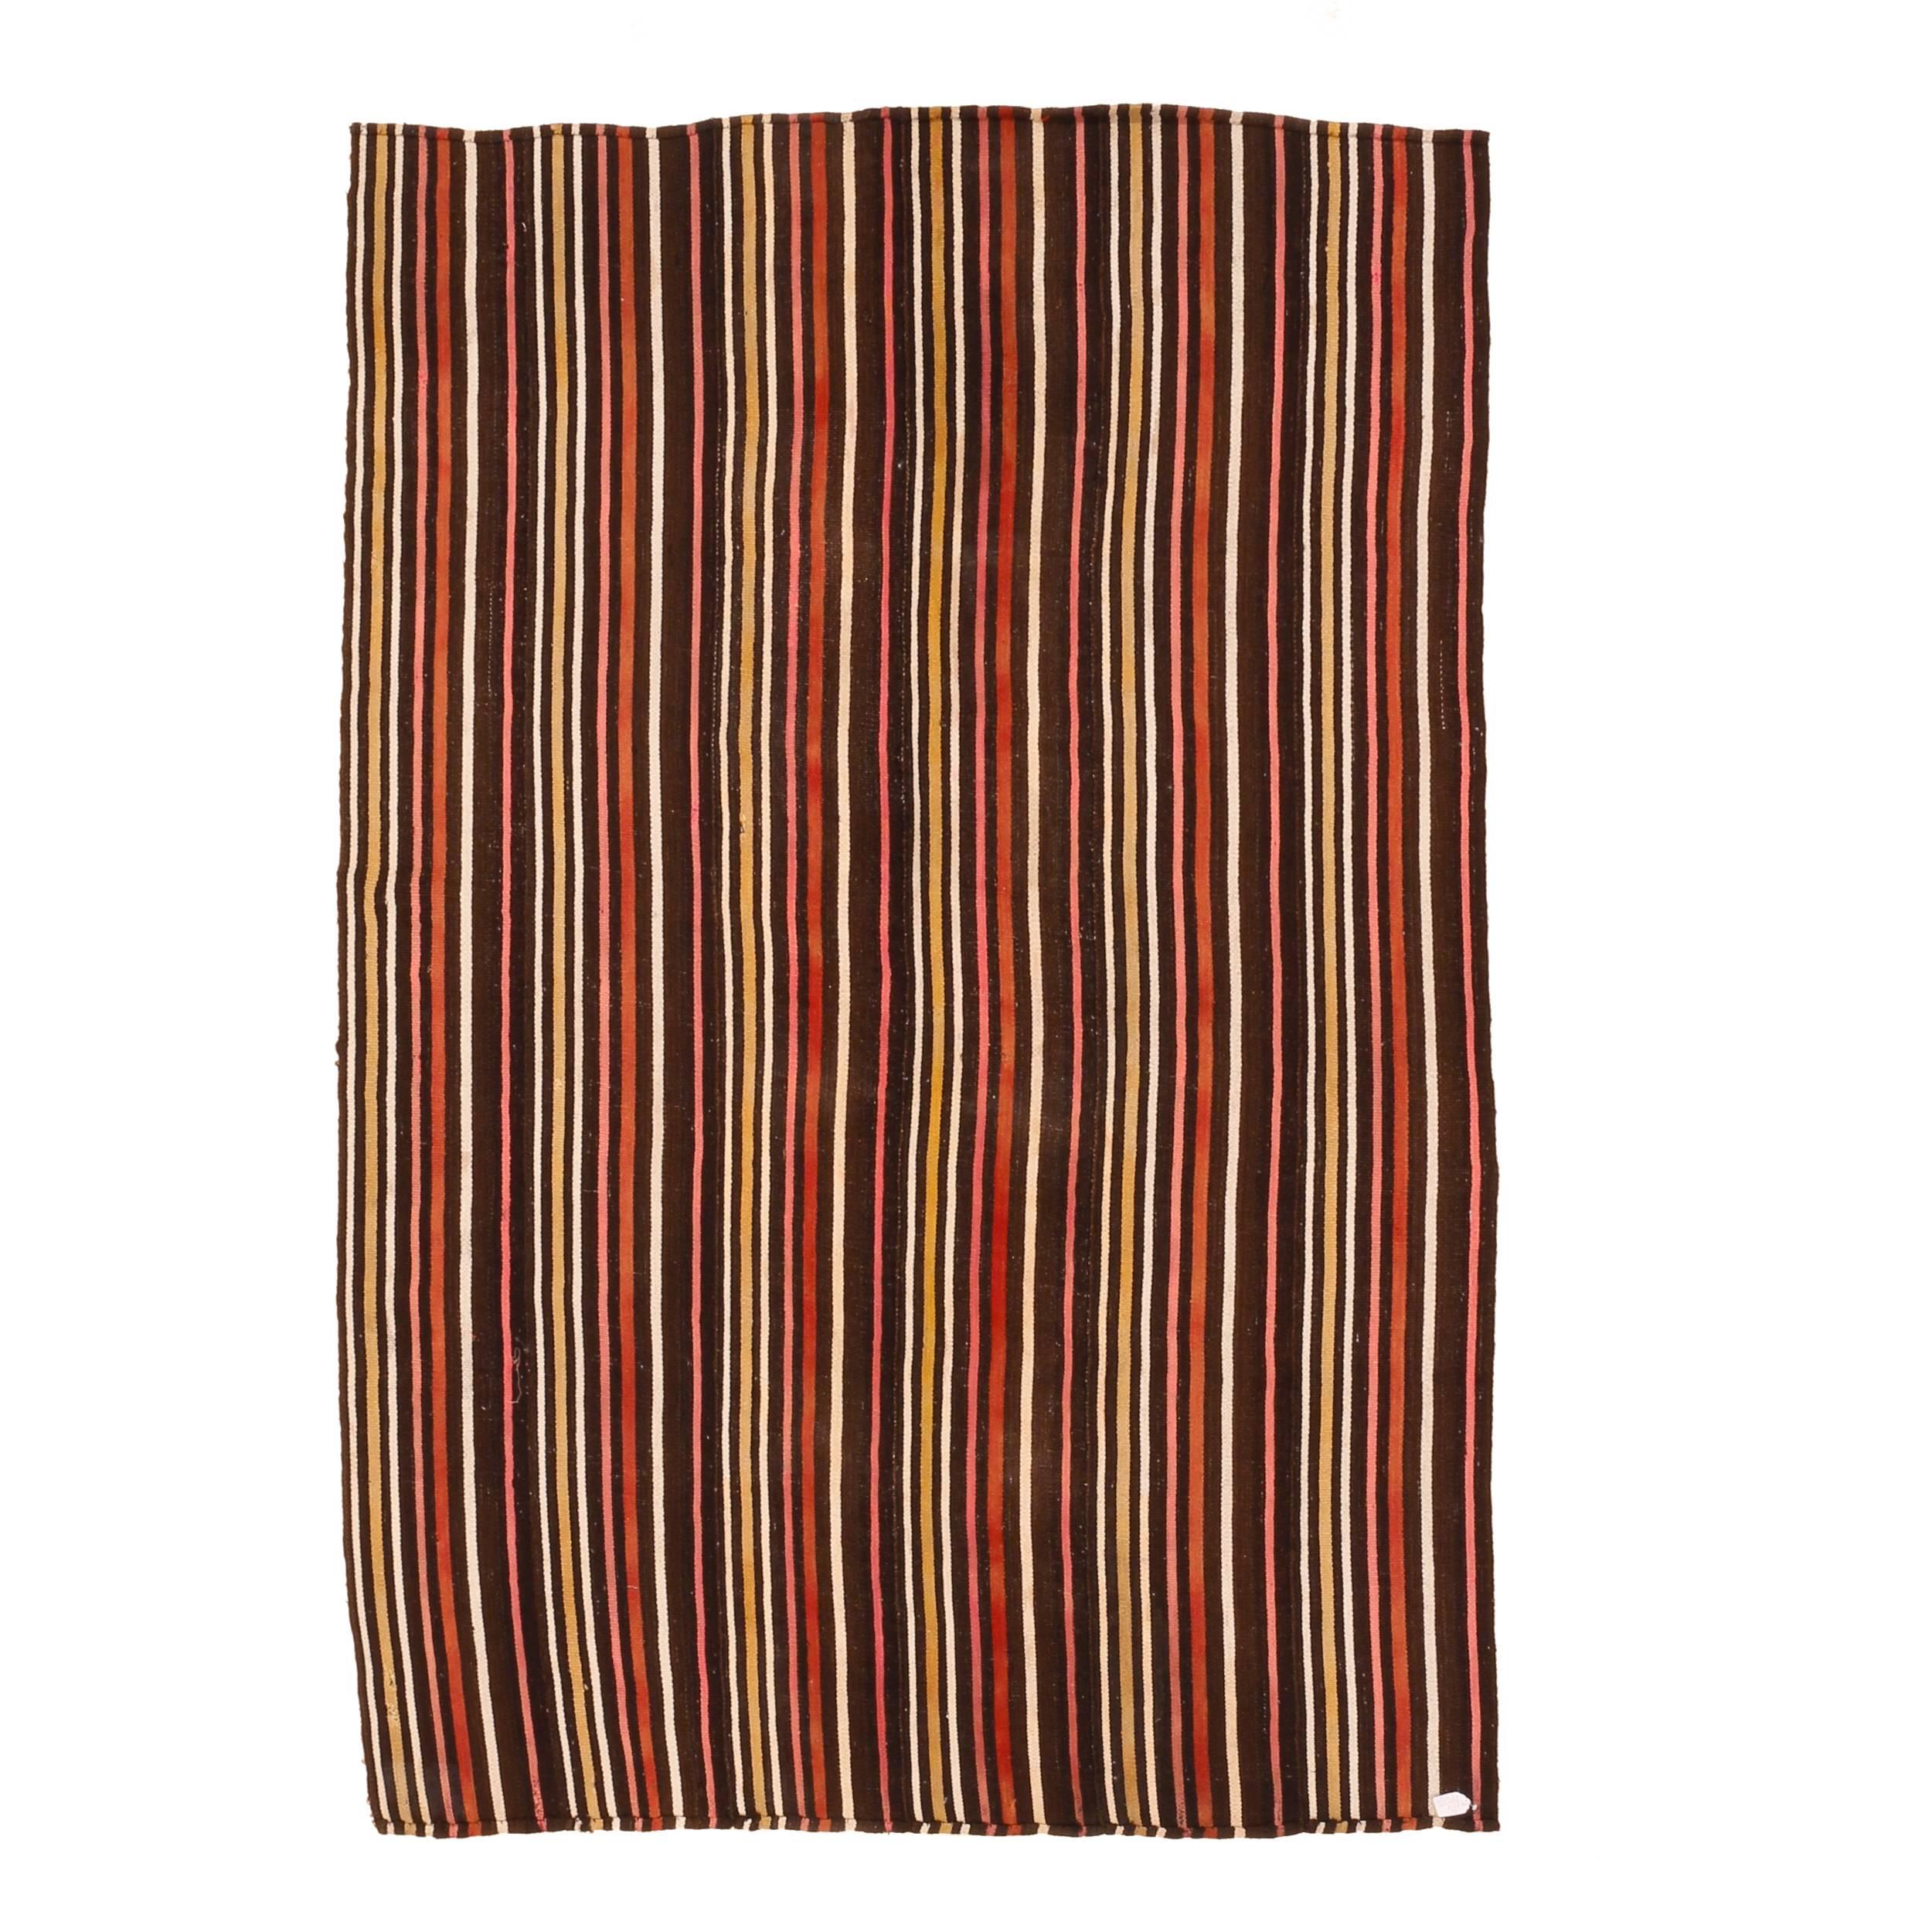 Distinguished by a pattern of vertical stripes, this sturdy kilim is woven with lanolin-rich wool from the nomadic pastures from the Toros Mountains, located in central Anatolia. A simple yet very elegant flat-weave.